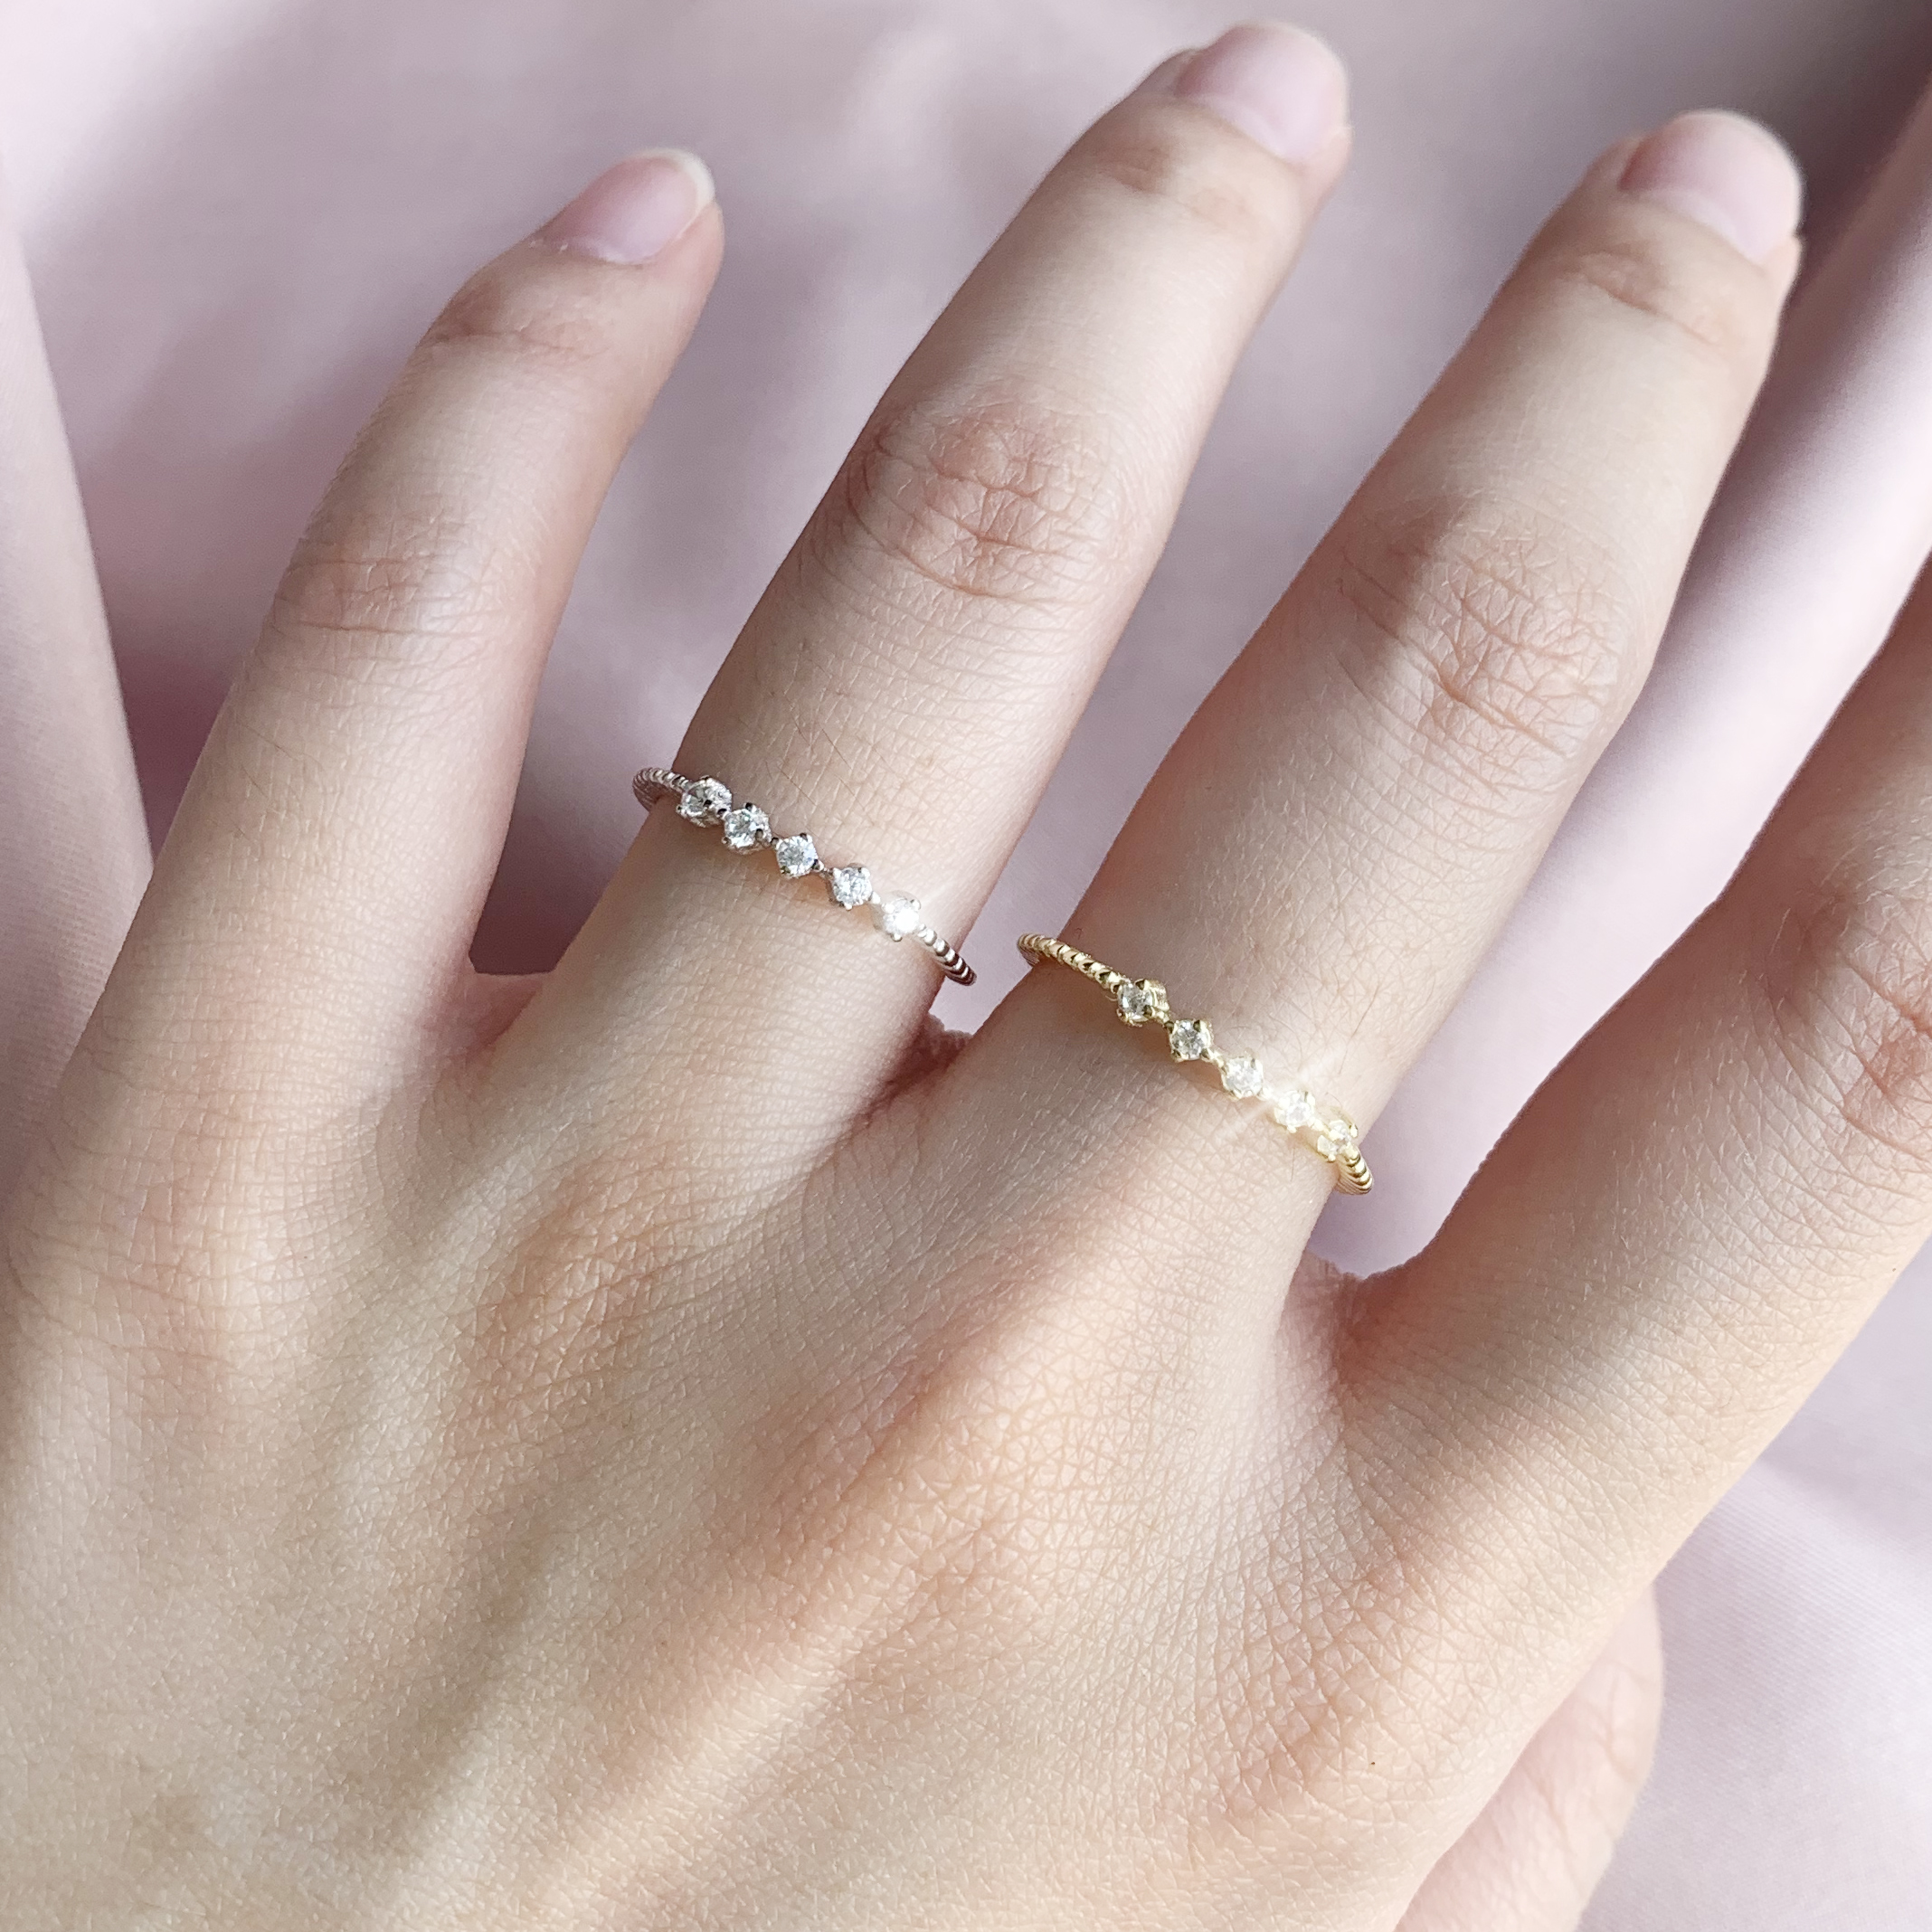 S925 Adjustable 4 Stone Ring_Gold:Silver_RM29.jpg